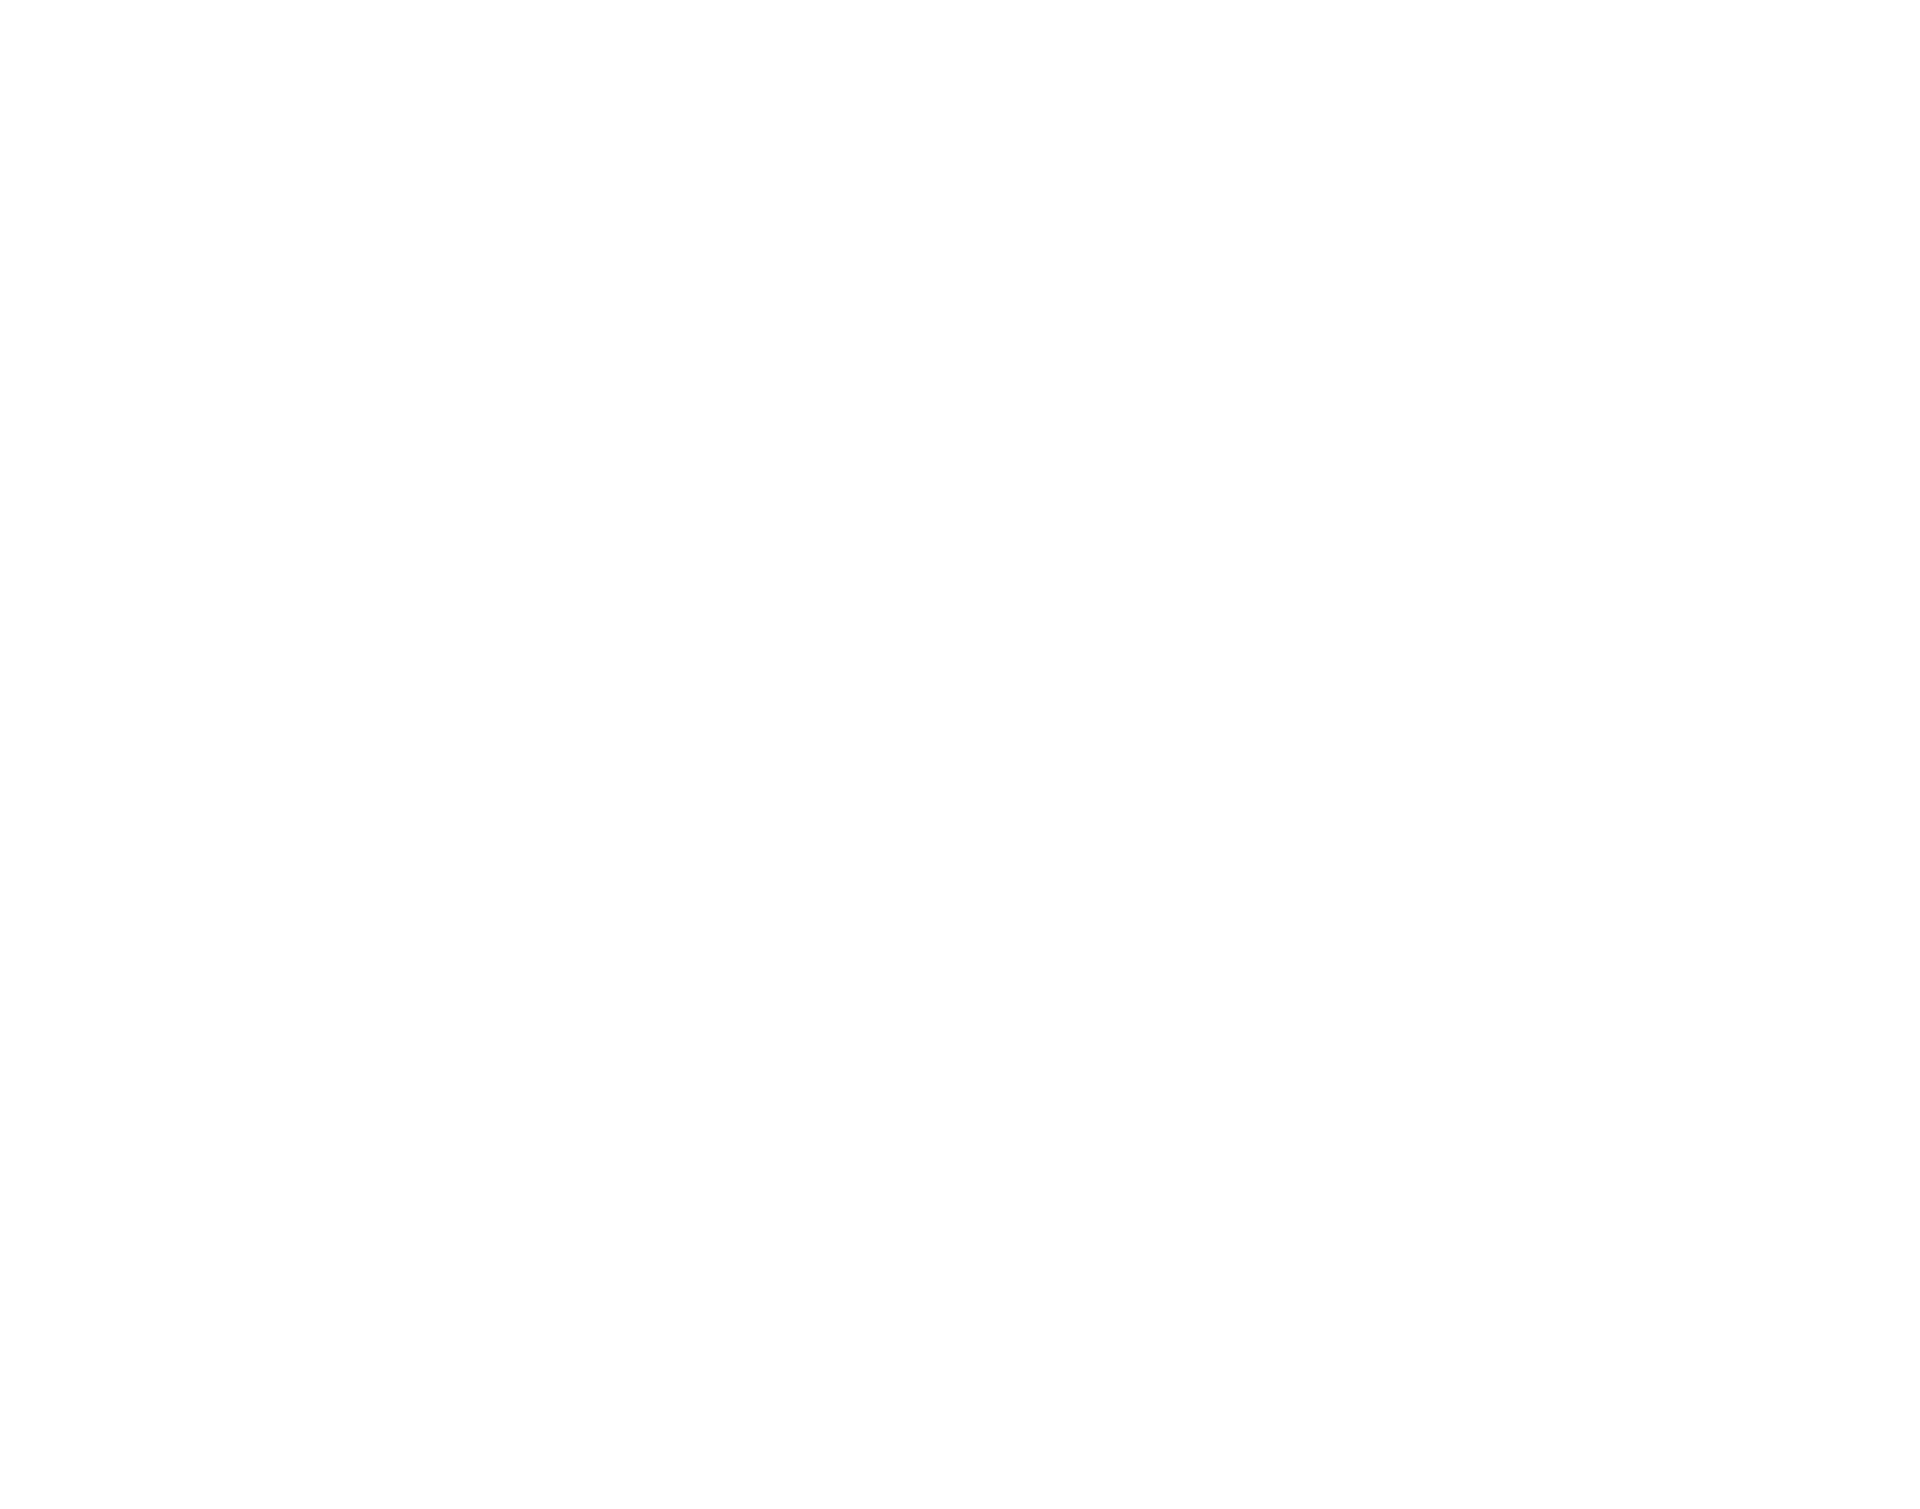 Closely Connected 